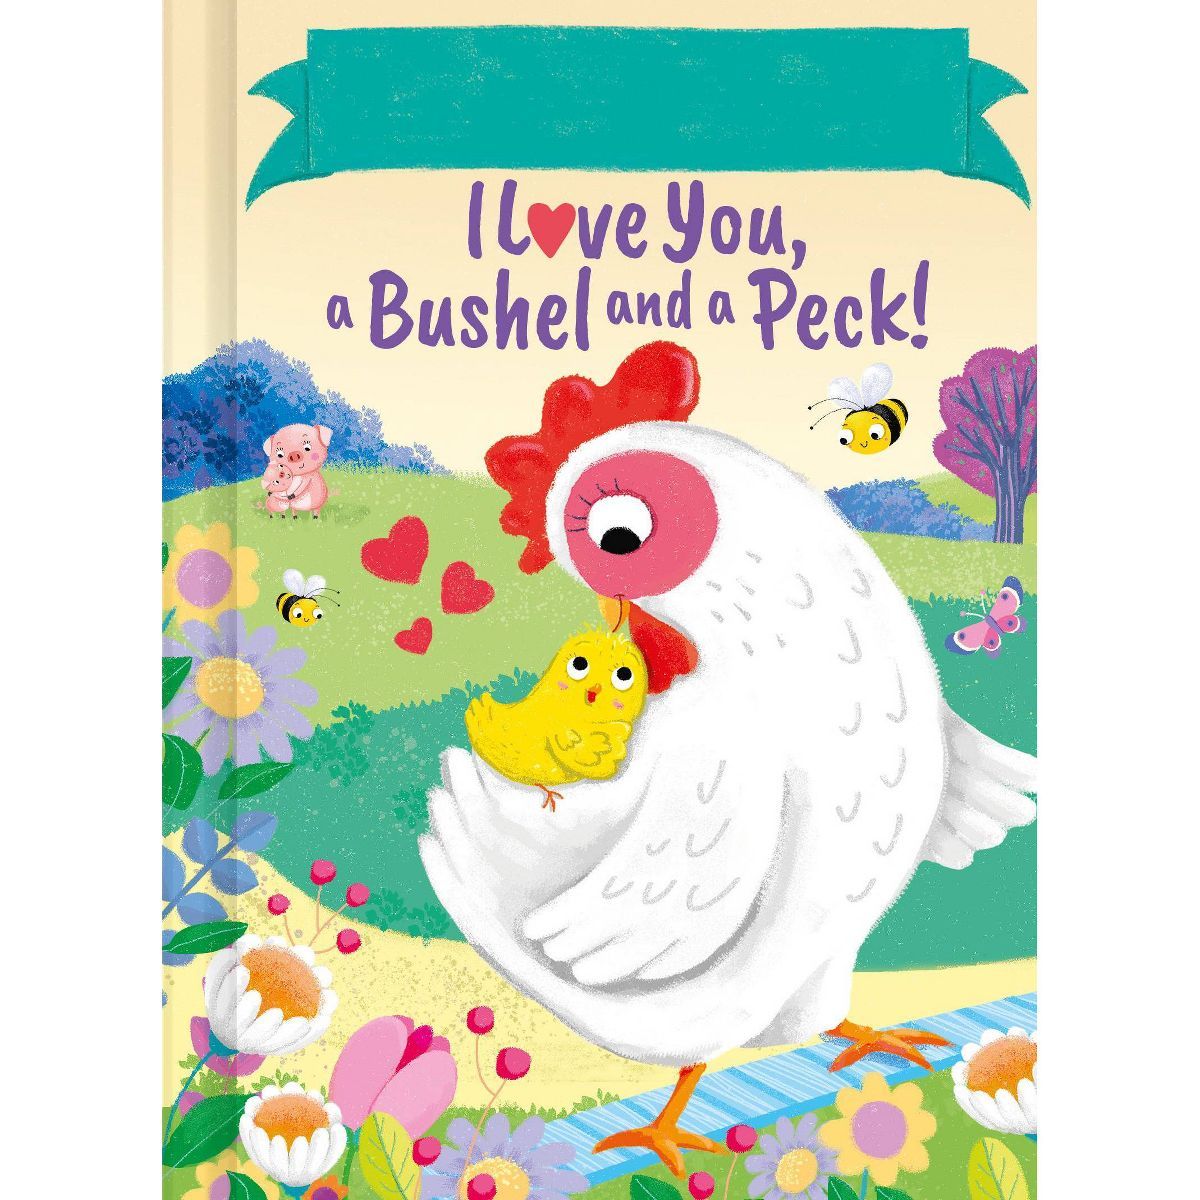 I Love You, a Bushel and a Peck! - by JD Green (Boardbook) | Target